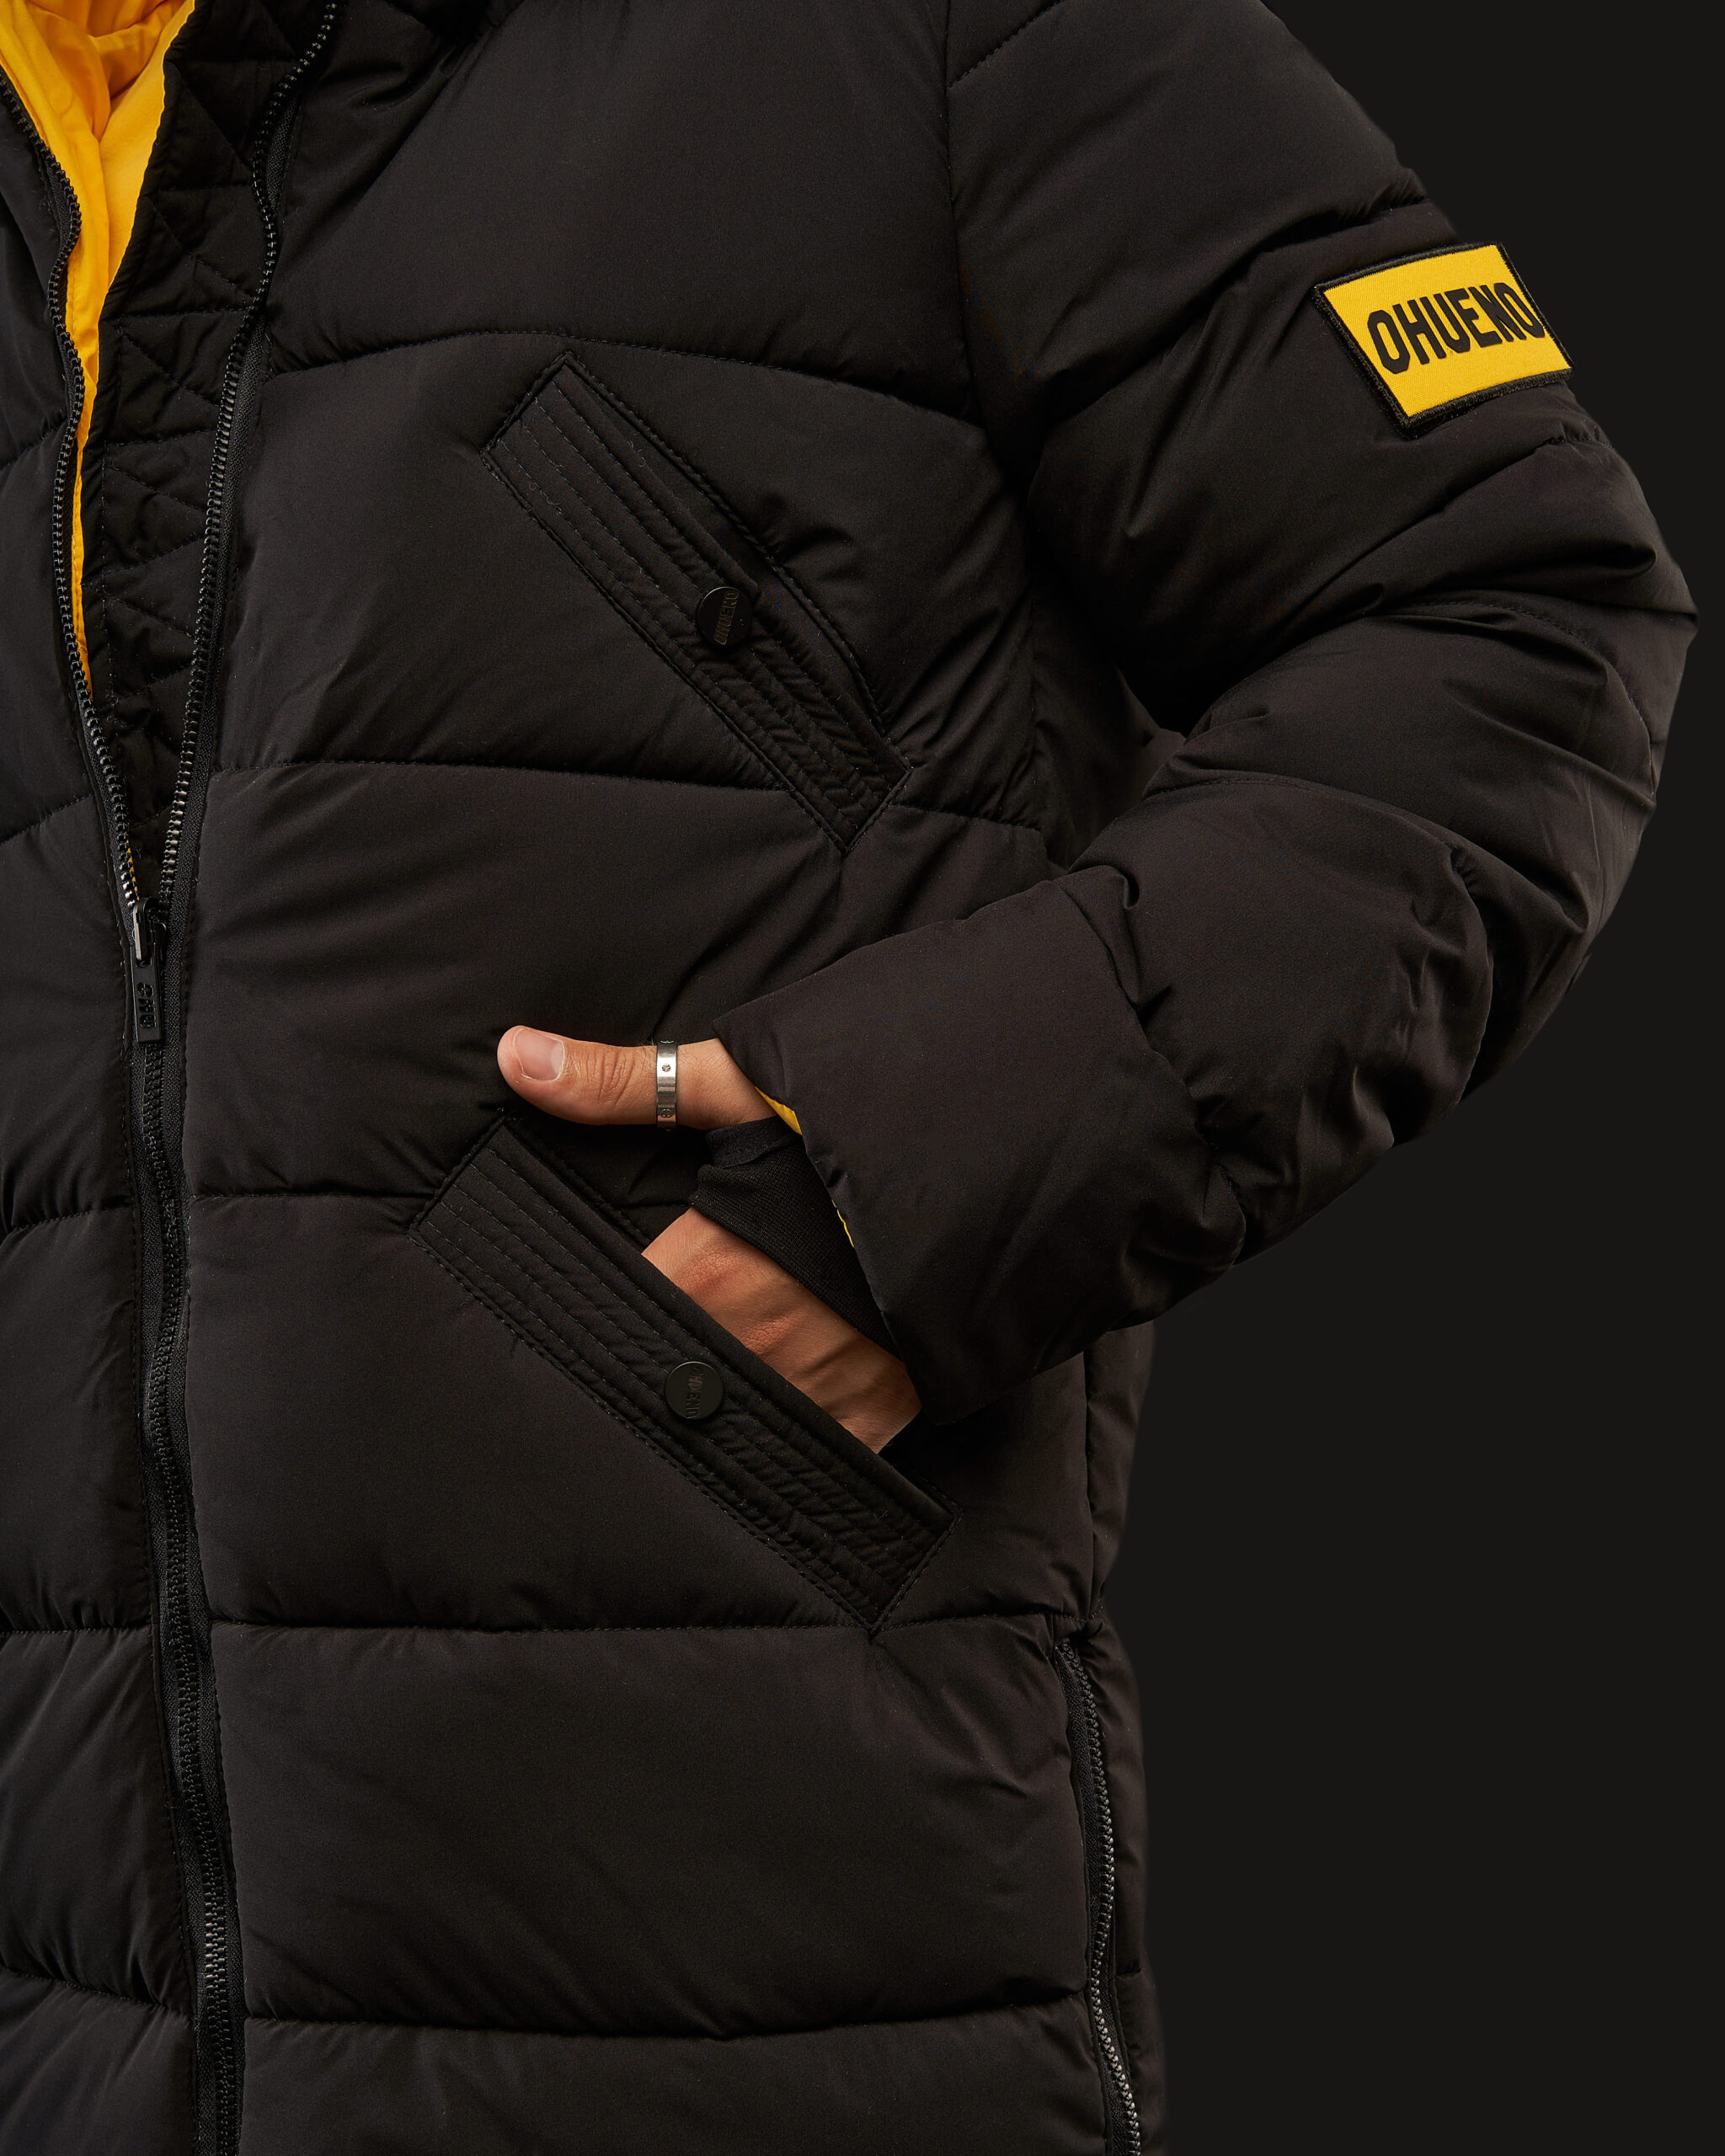 Down jacket Image: https://ohueno-official.com/wp-content/uploads/m01261-scaled.jpg